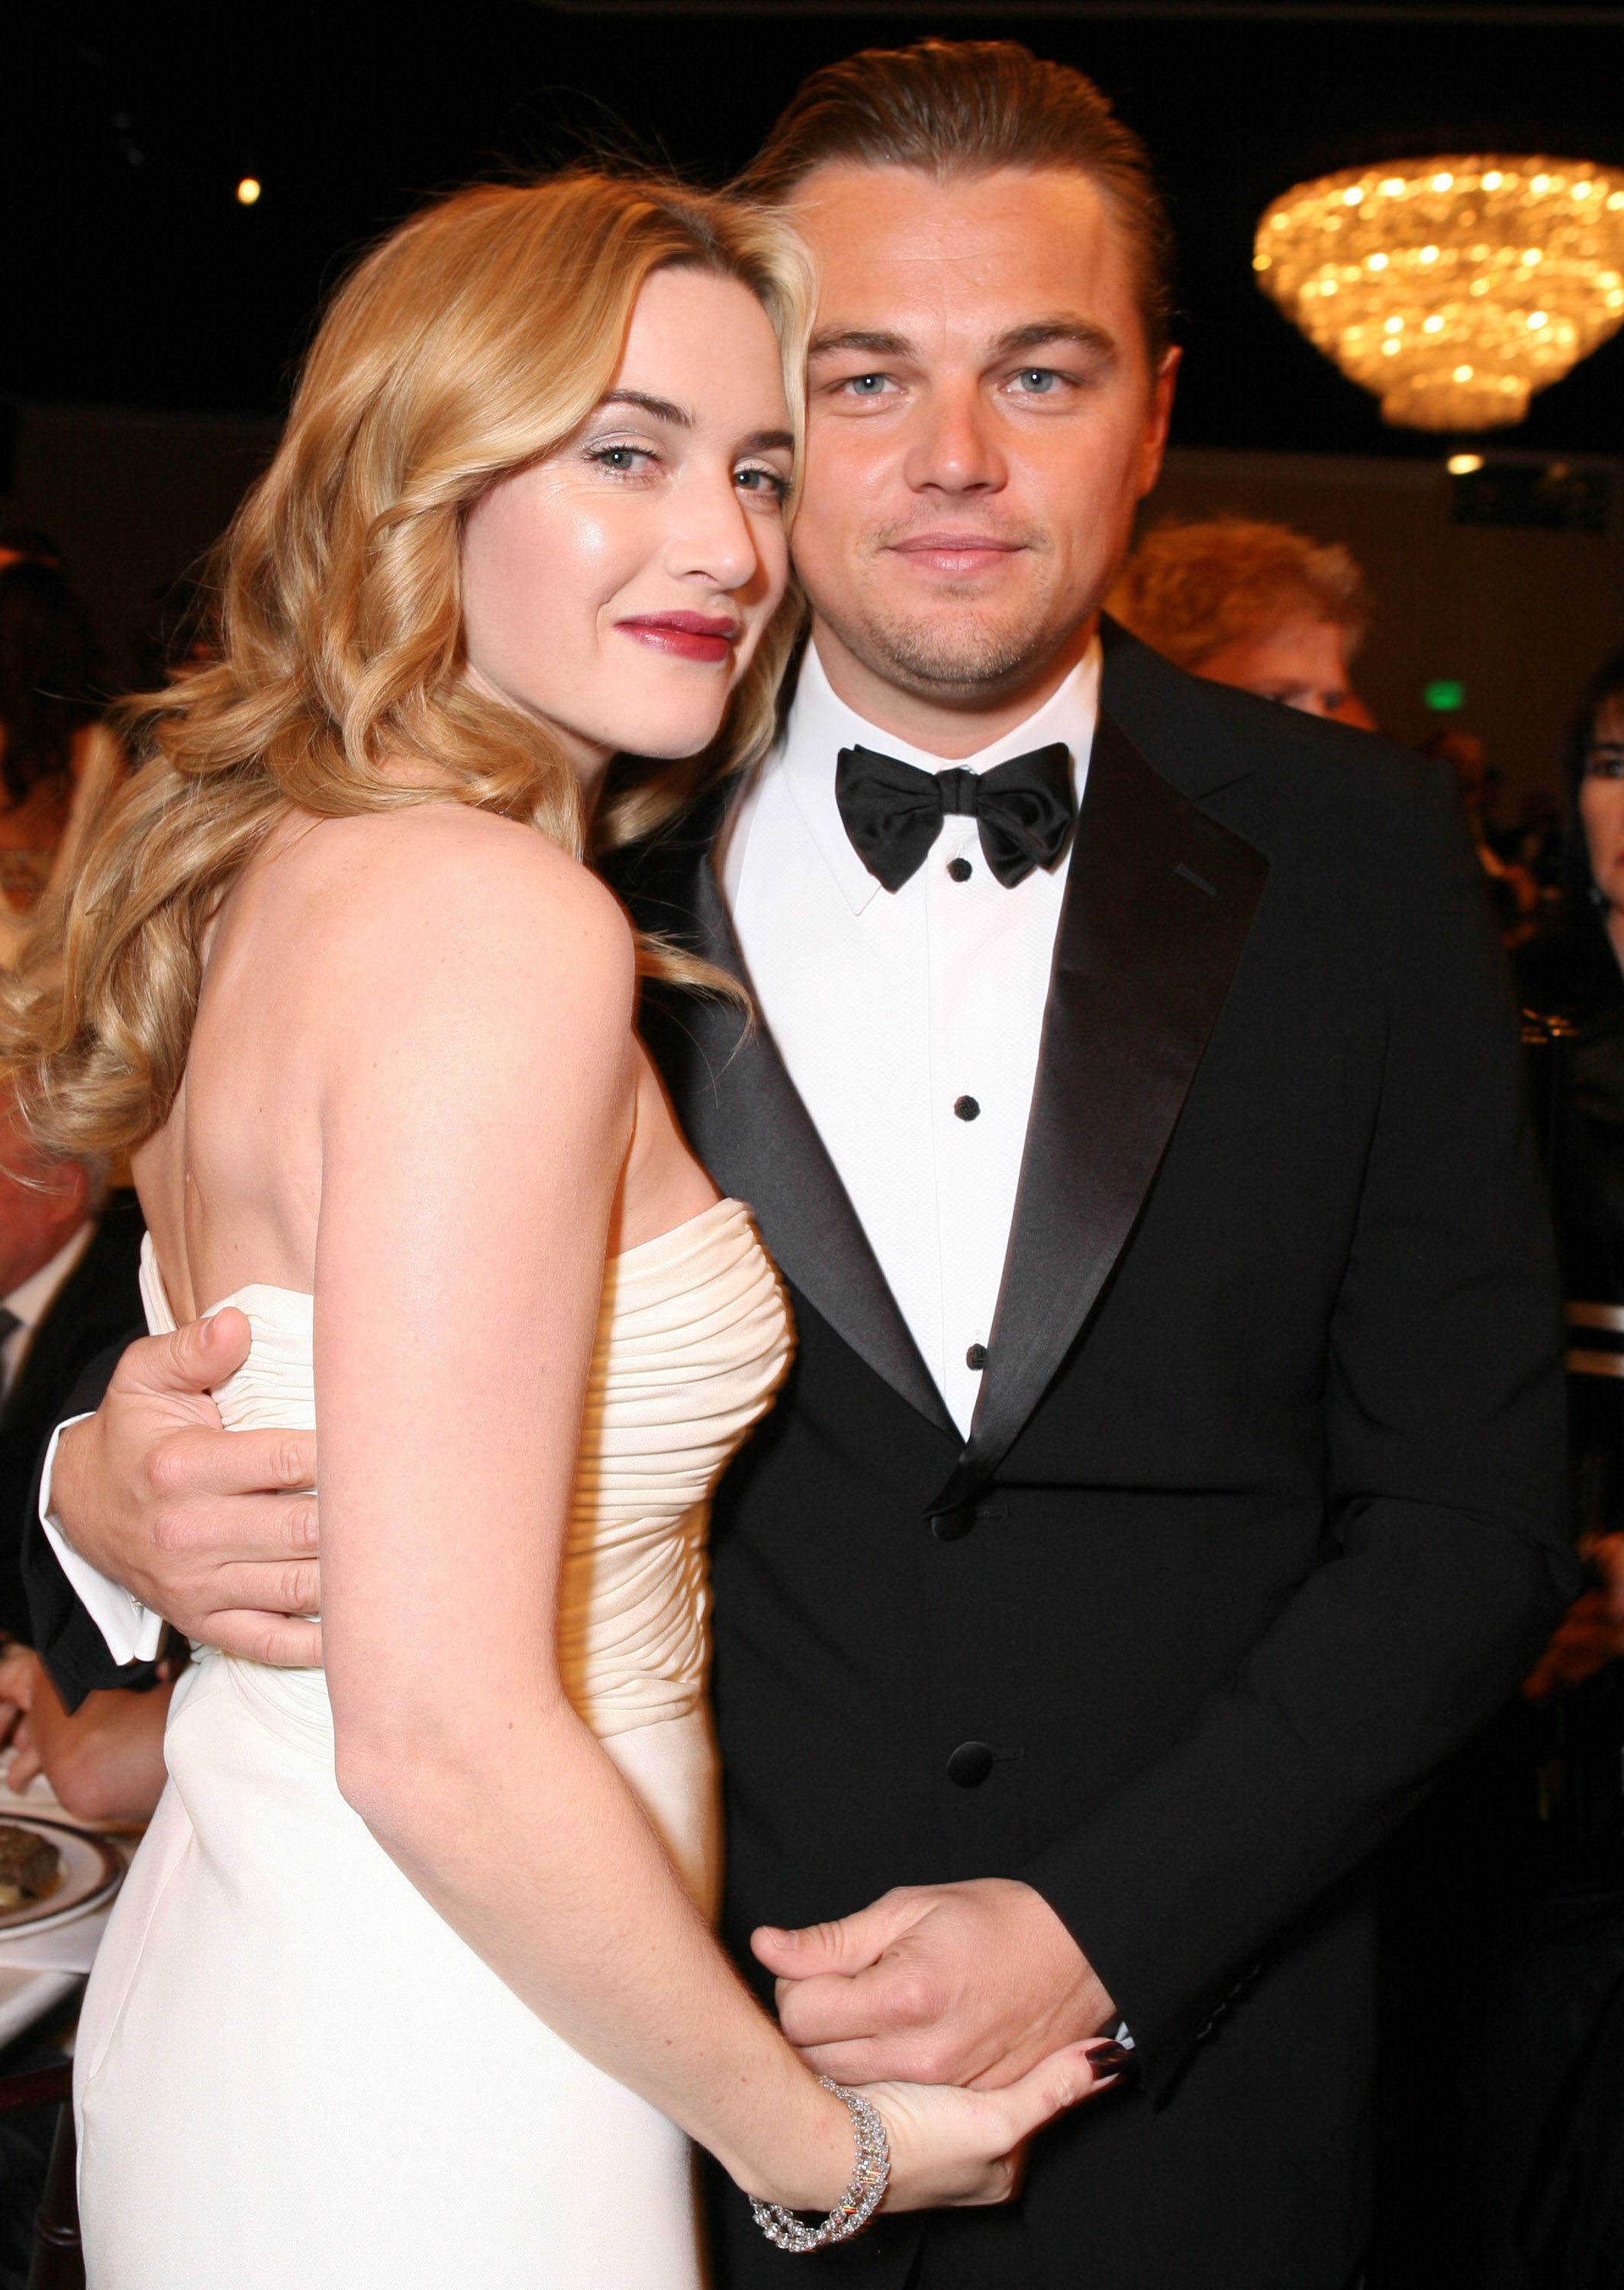 kollision Udfordring diagonal Kate Winslet And Leonardo DiCaprio's Friendship: The British Actor Opens Up  About 'Titanic' Co-Star